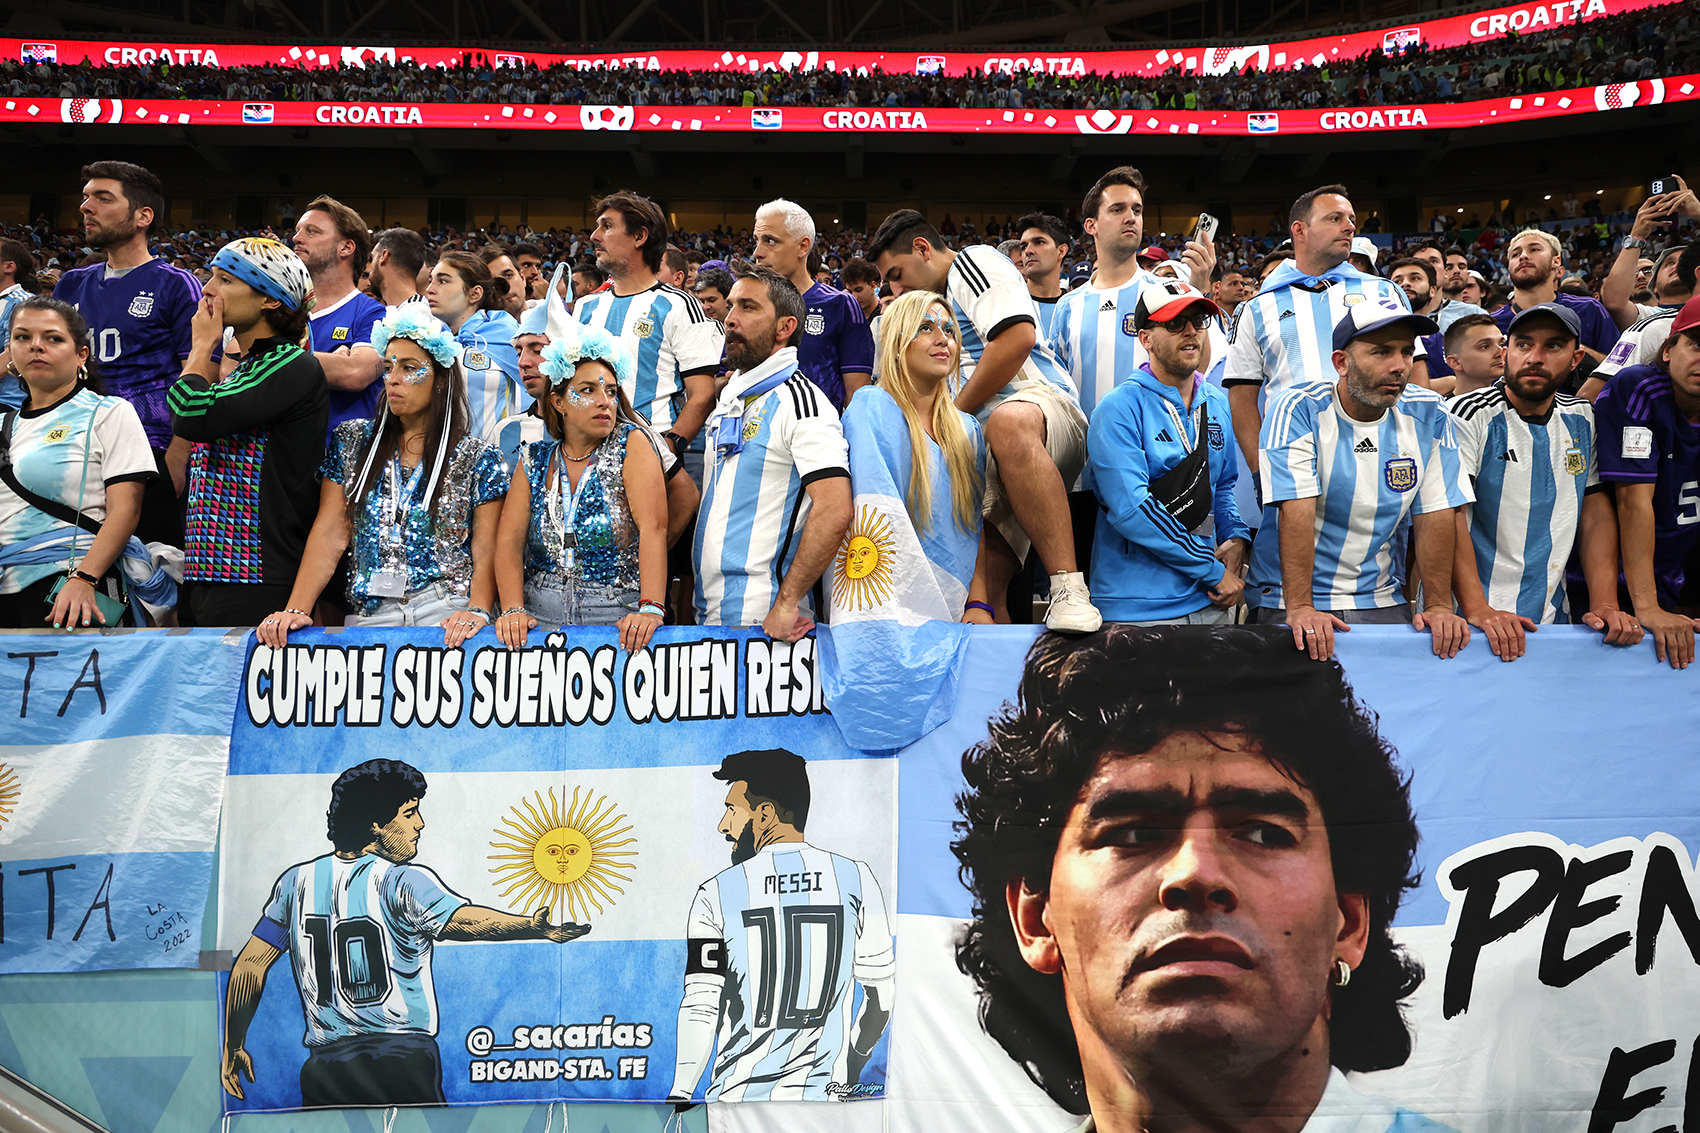 Fans of Argentina in front of a banner / flag showing the face of Diego Maradona and Lionel Messi 